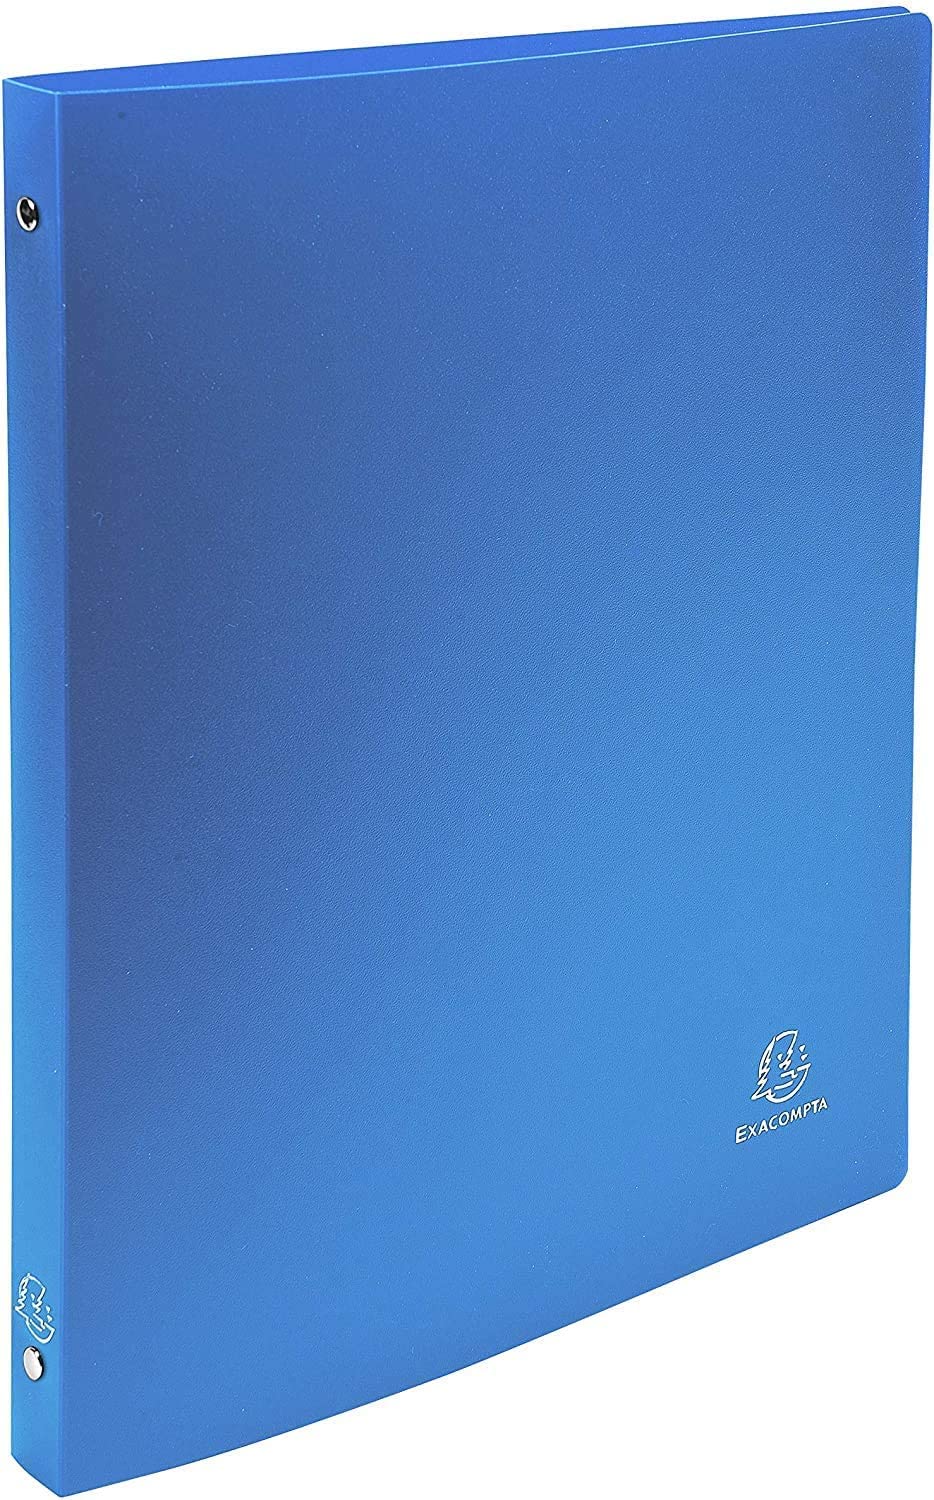 Exacompta A4 Ring Binder 2 Ring Light Blue RRP £2.34 CLEARANCE XL 99p